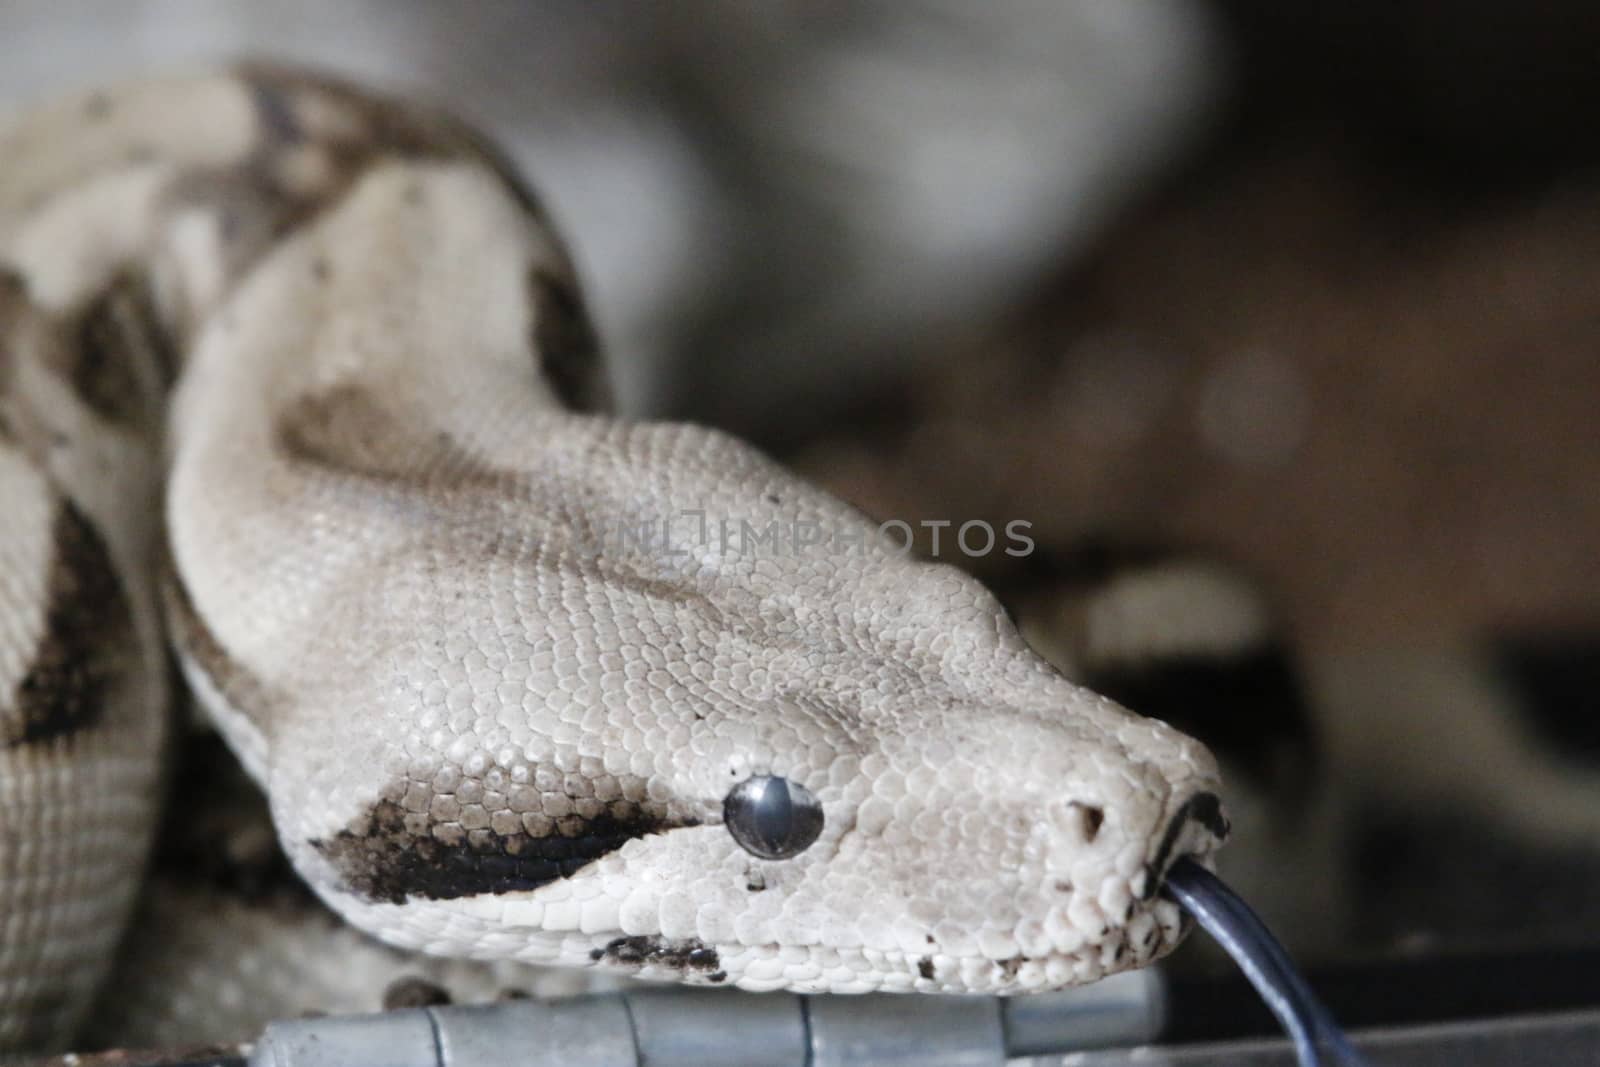 Boa constrictor, a species of large, heavy-bodied snake. by mynewturtle1